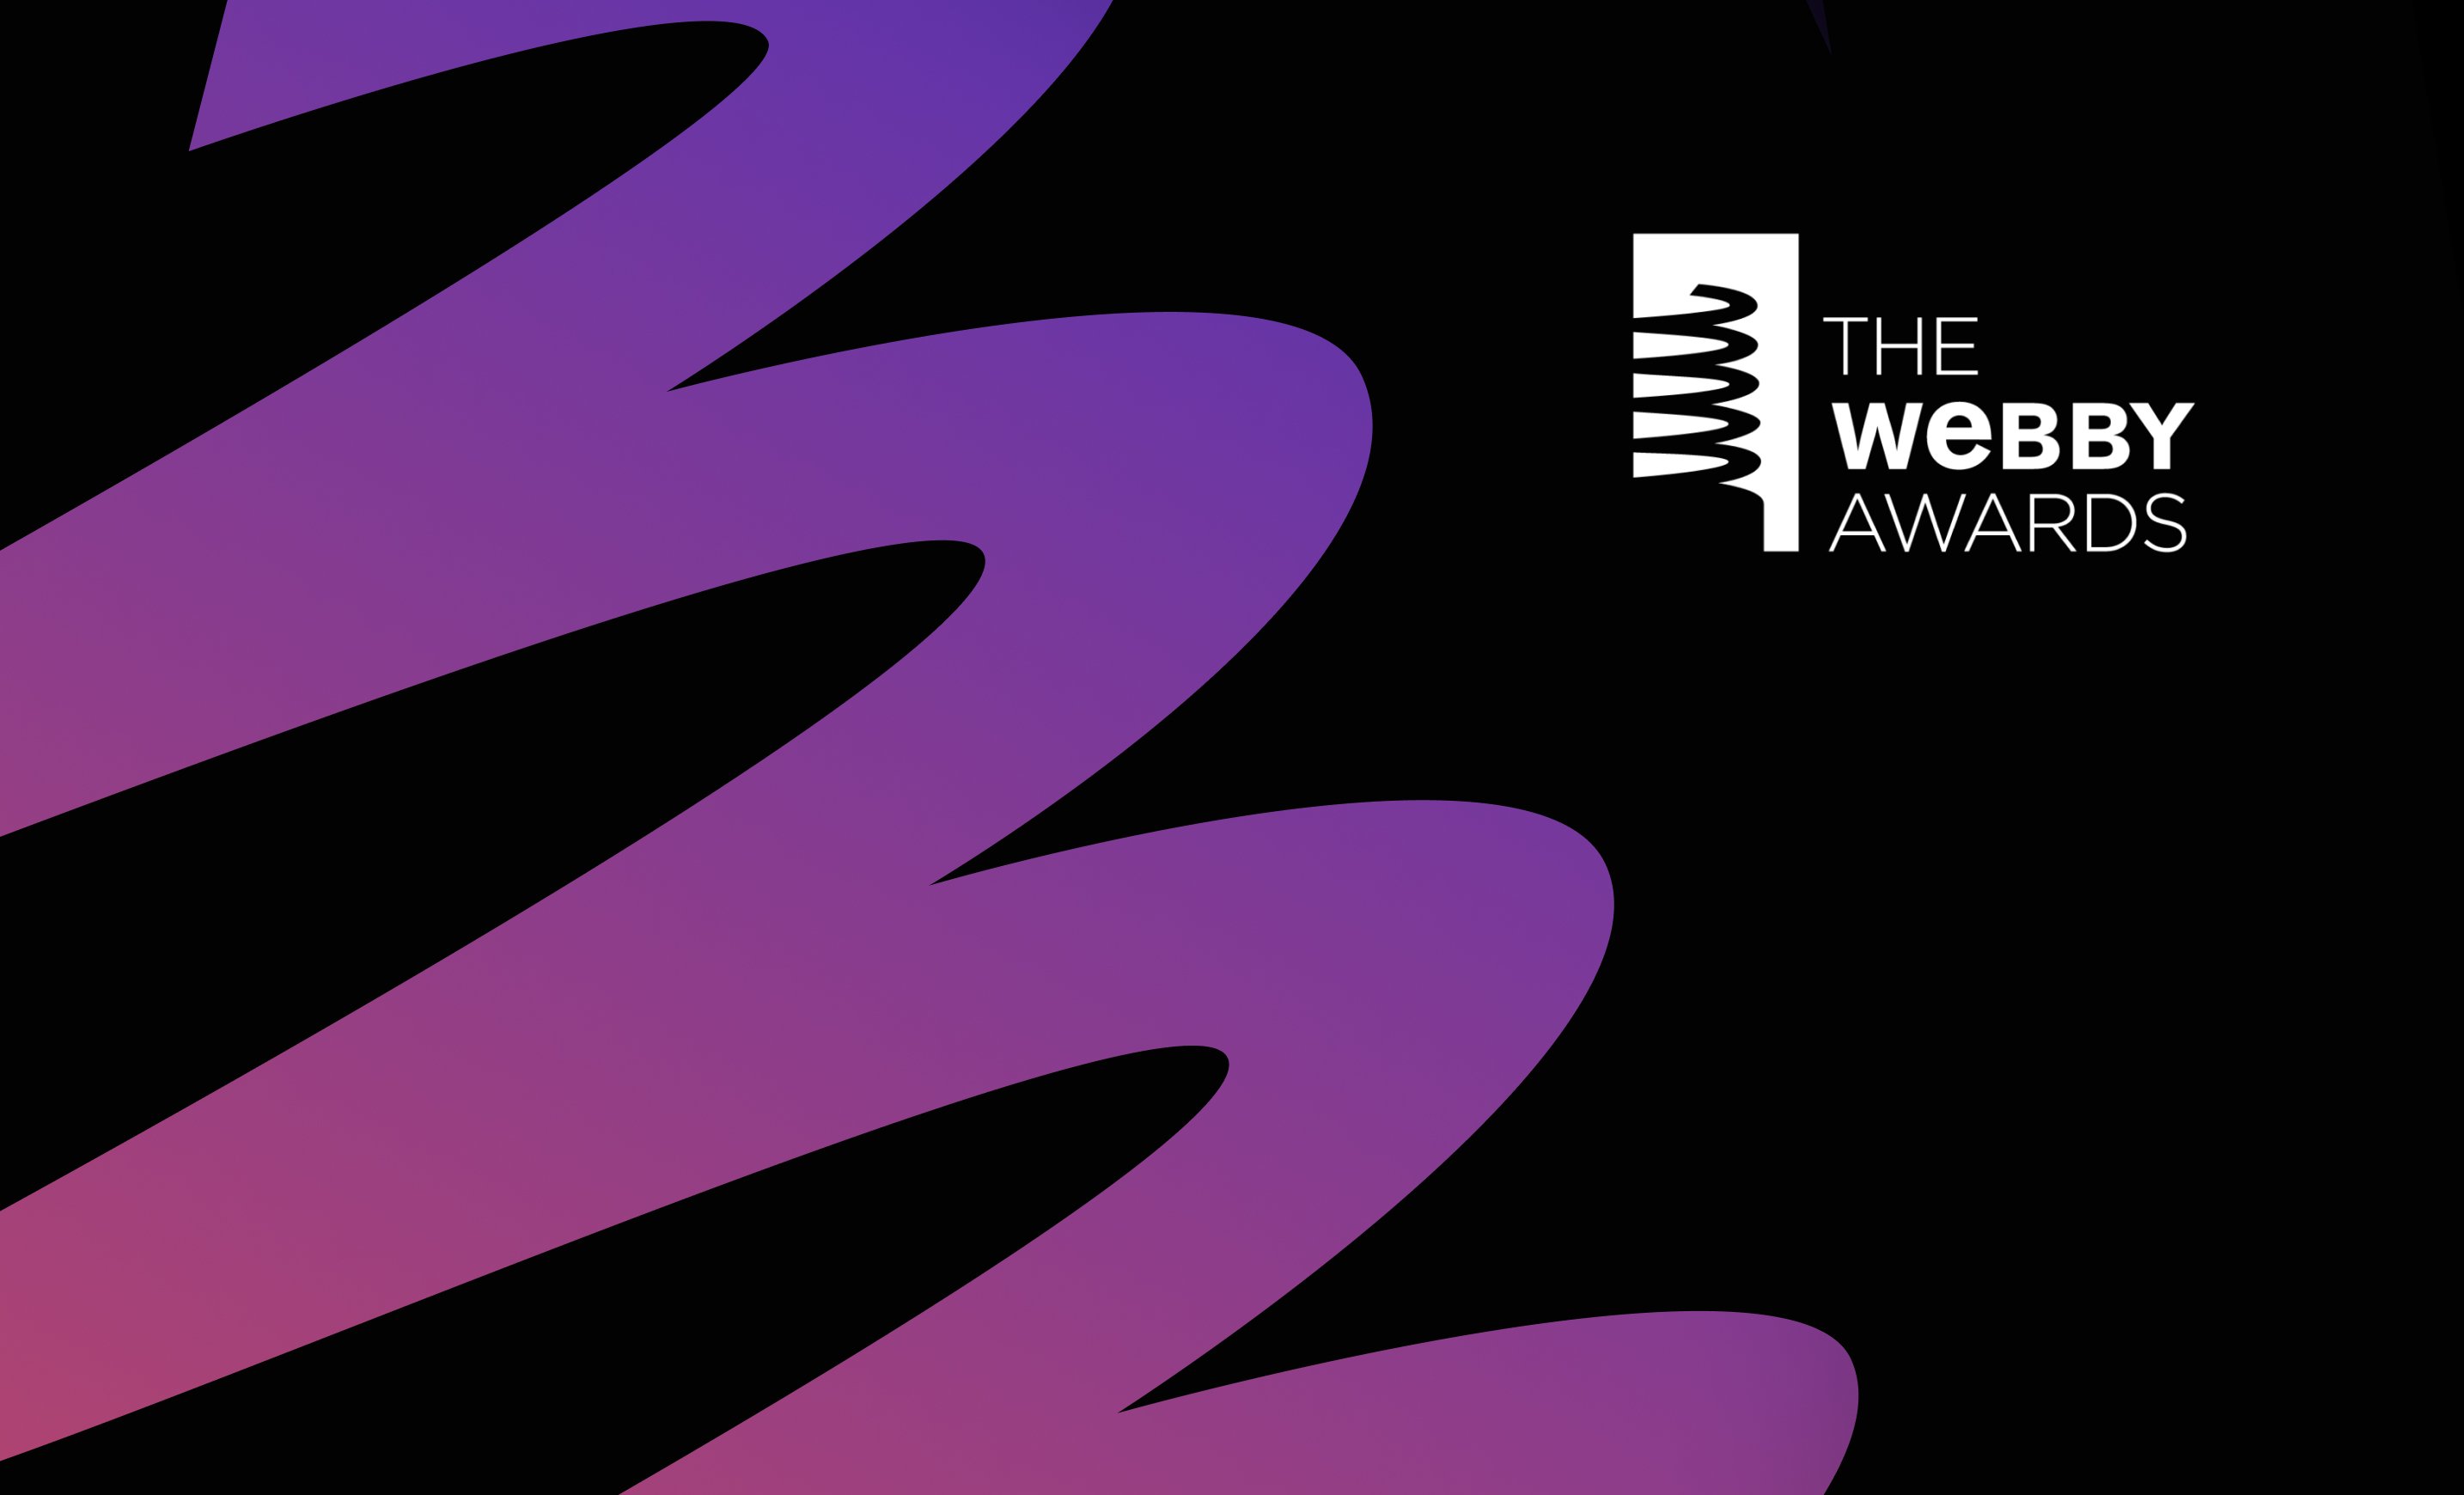 NASA × Blink UX Work Recognized with Webby Awards